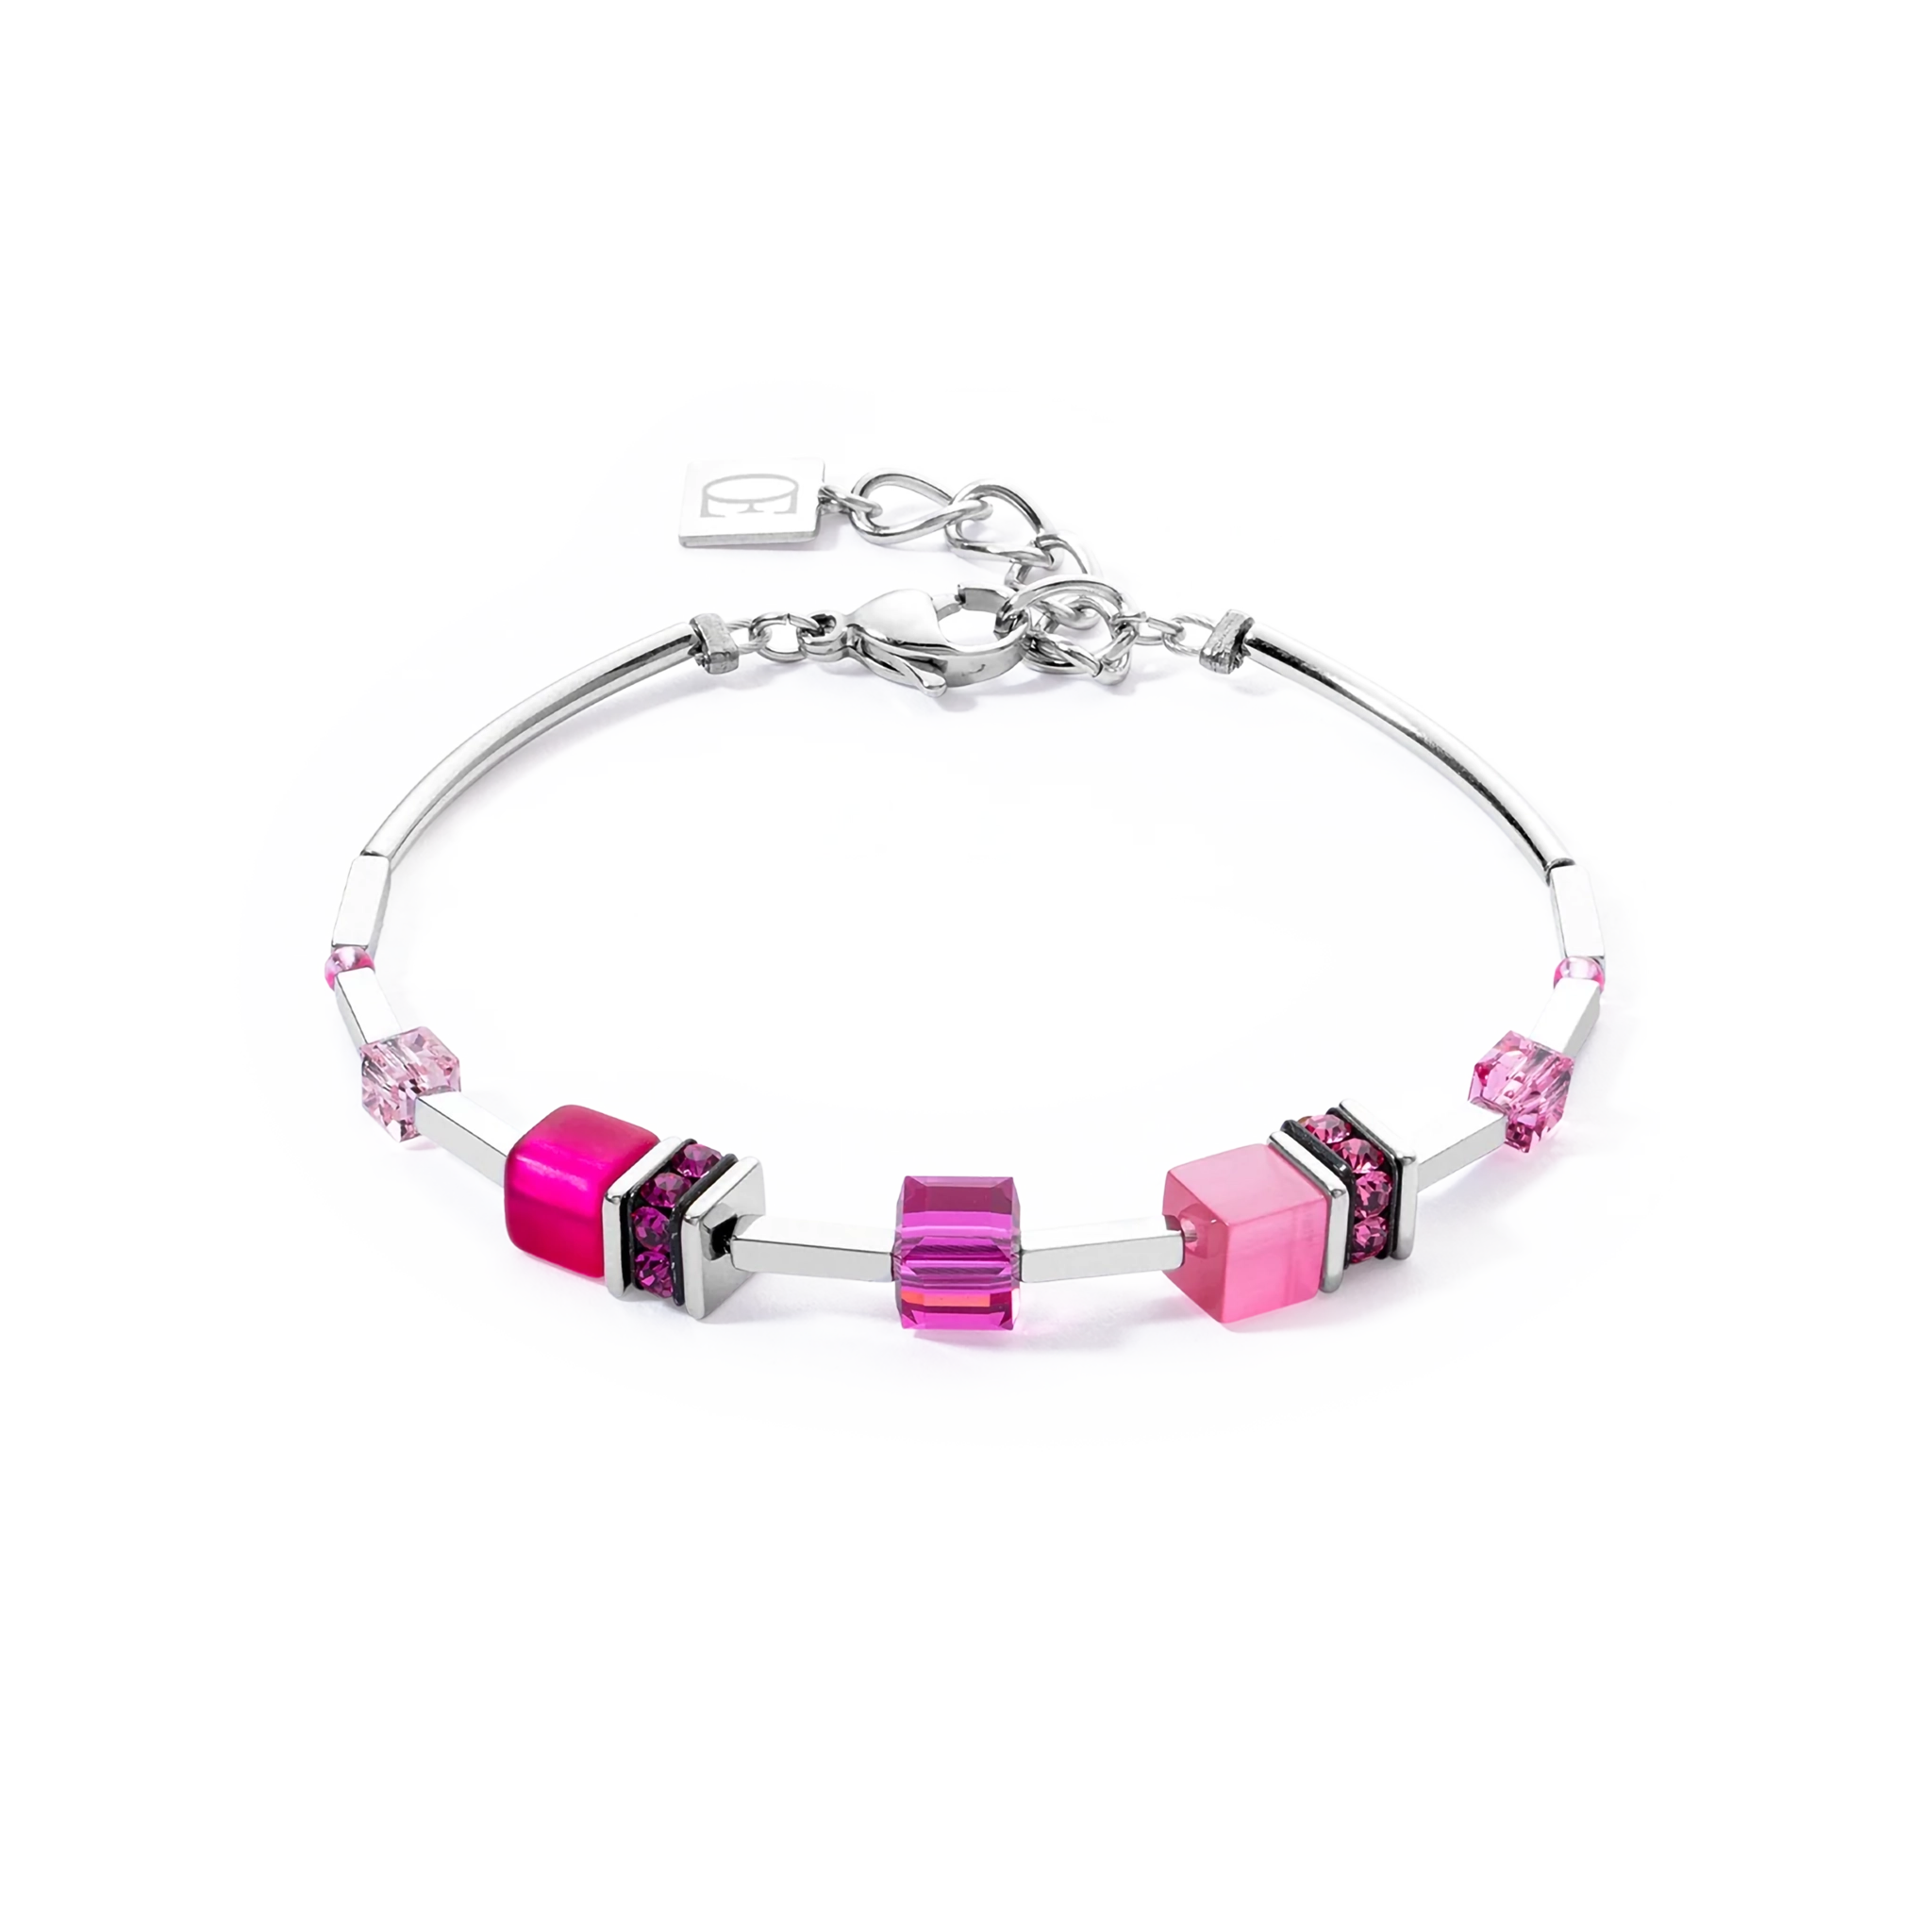 A bright pink beaded stainless steel bracelet